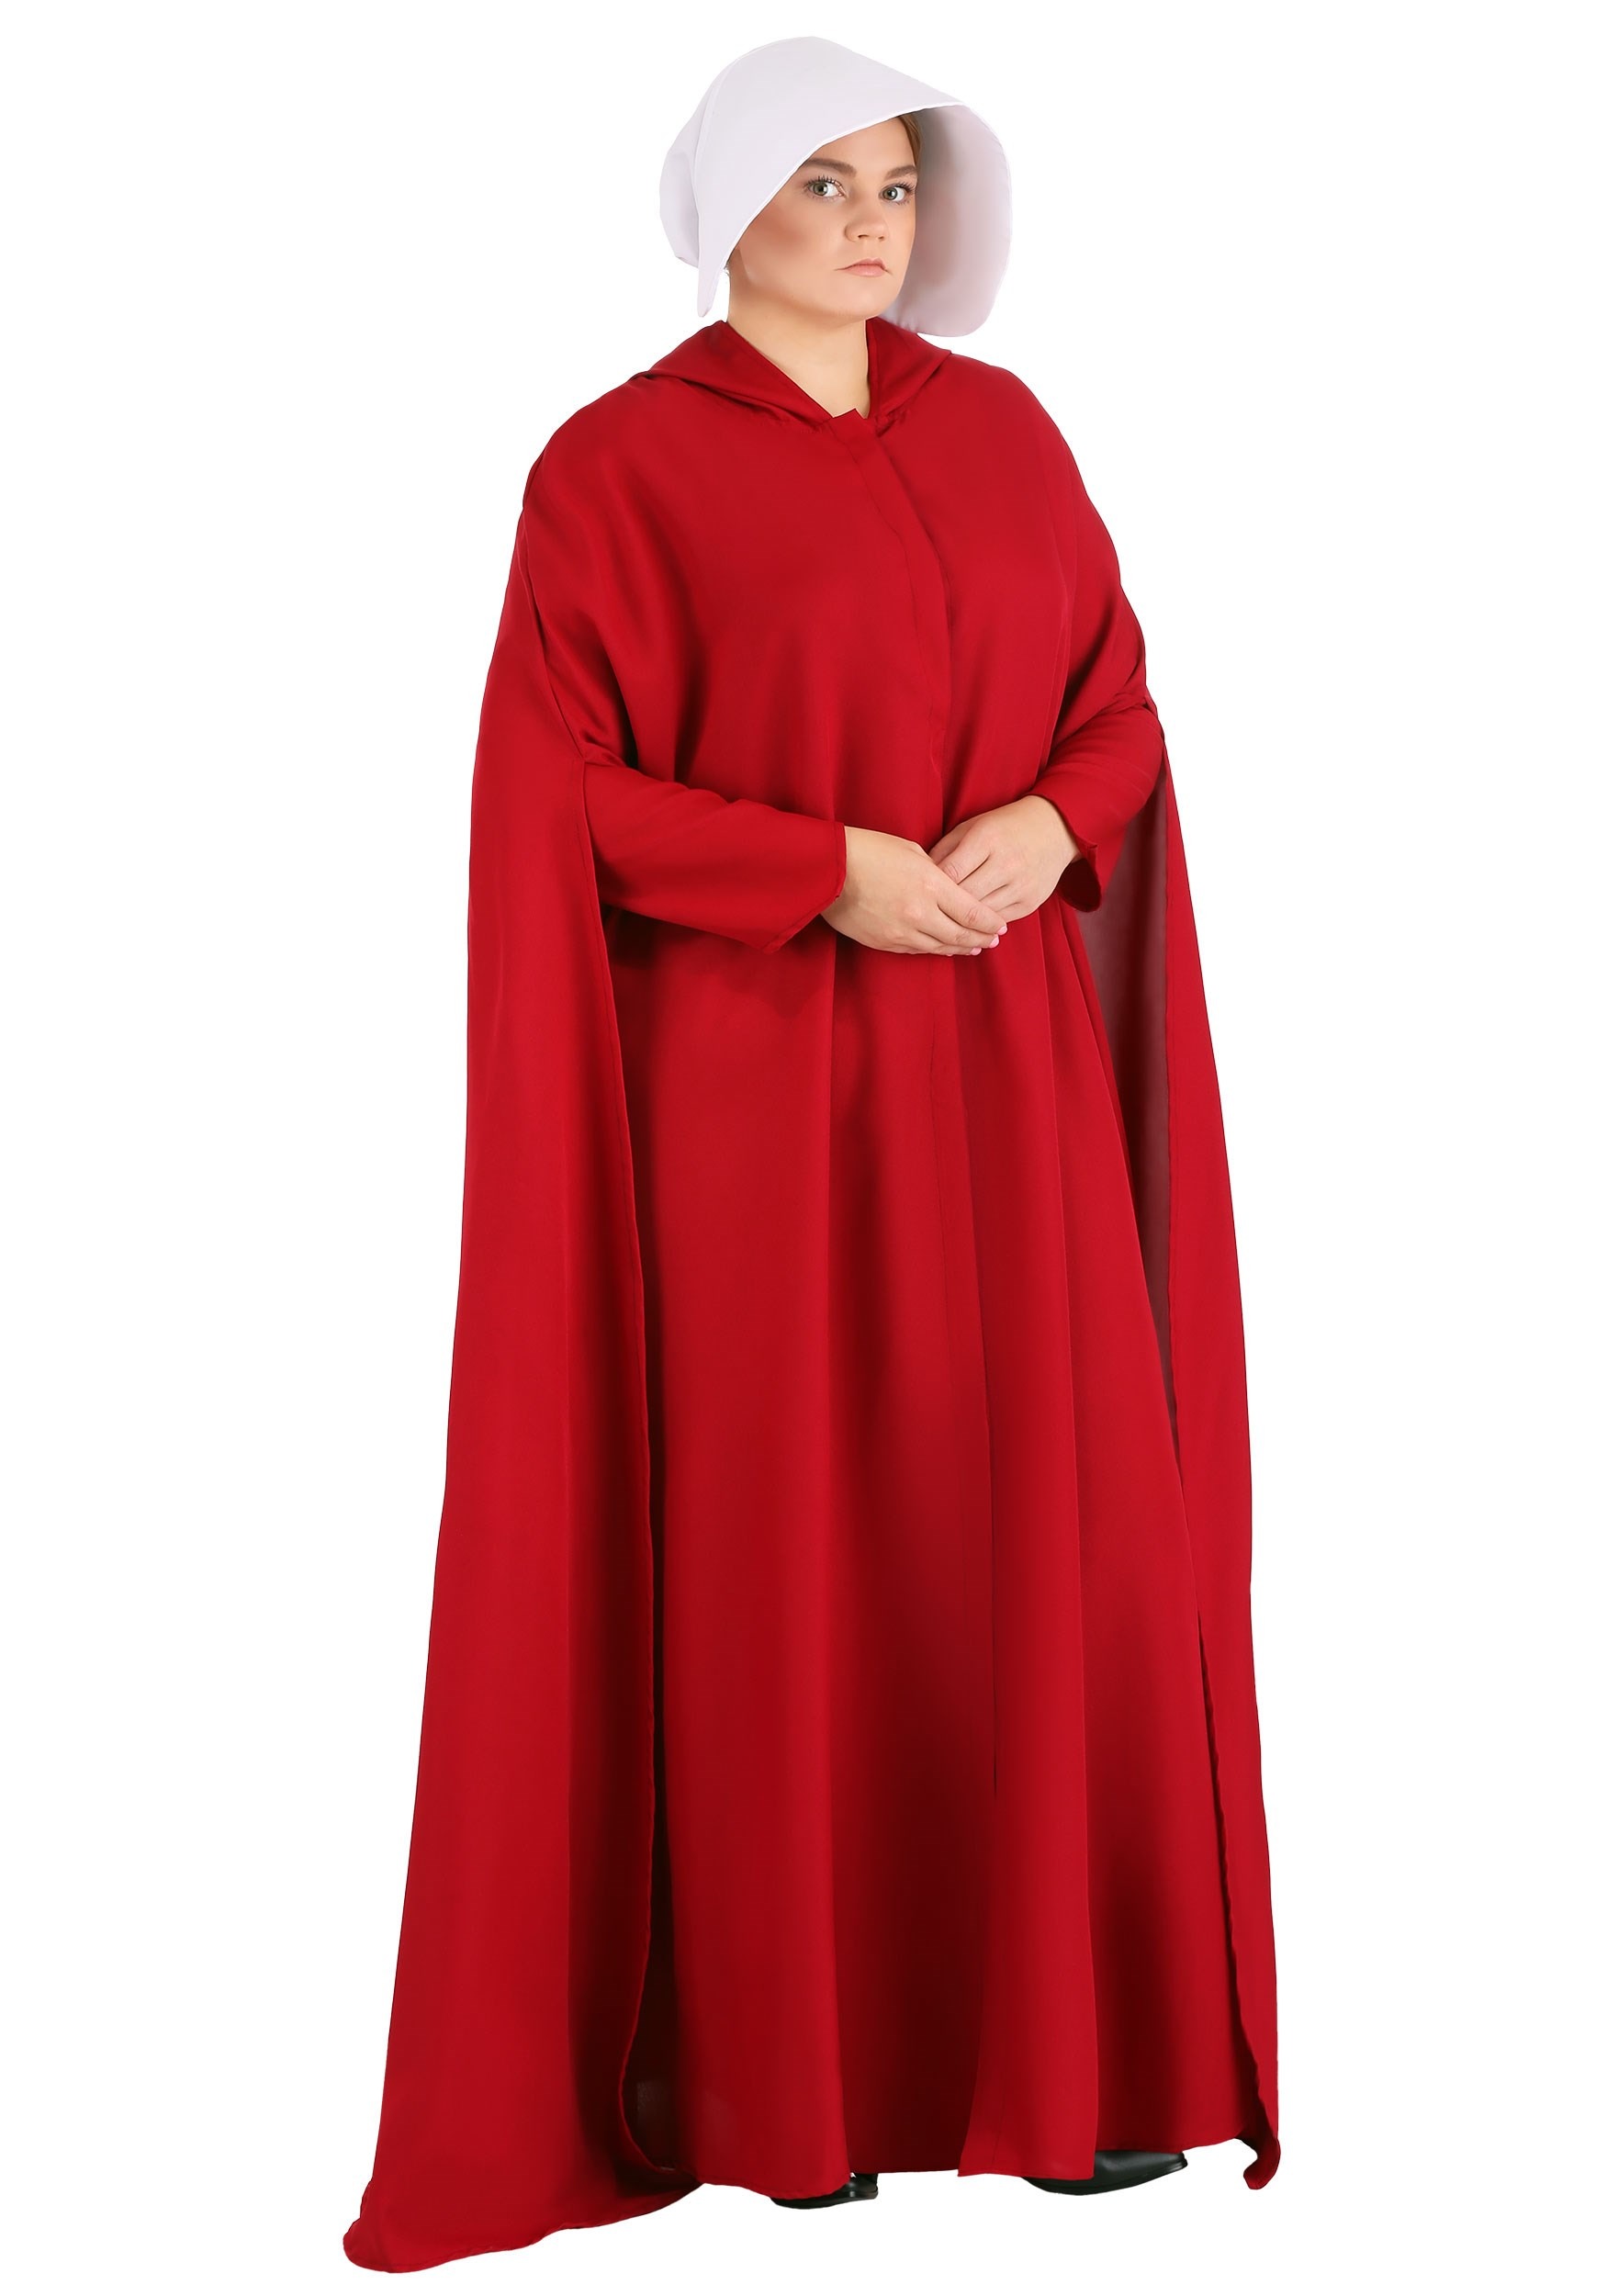 Plus Size Handmaids Tale Costume for Women | Exclusive